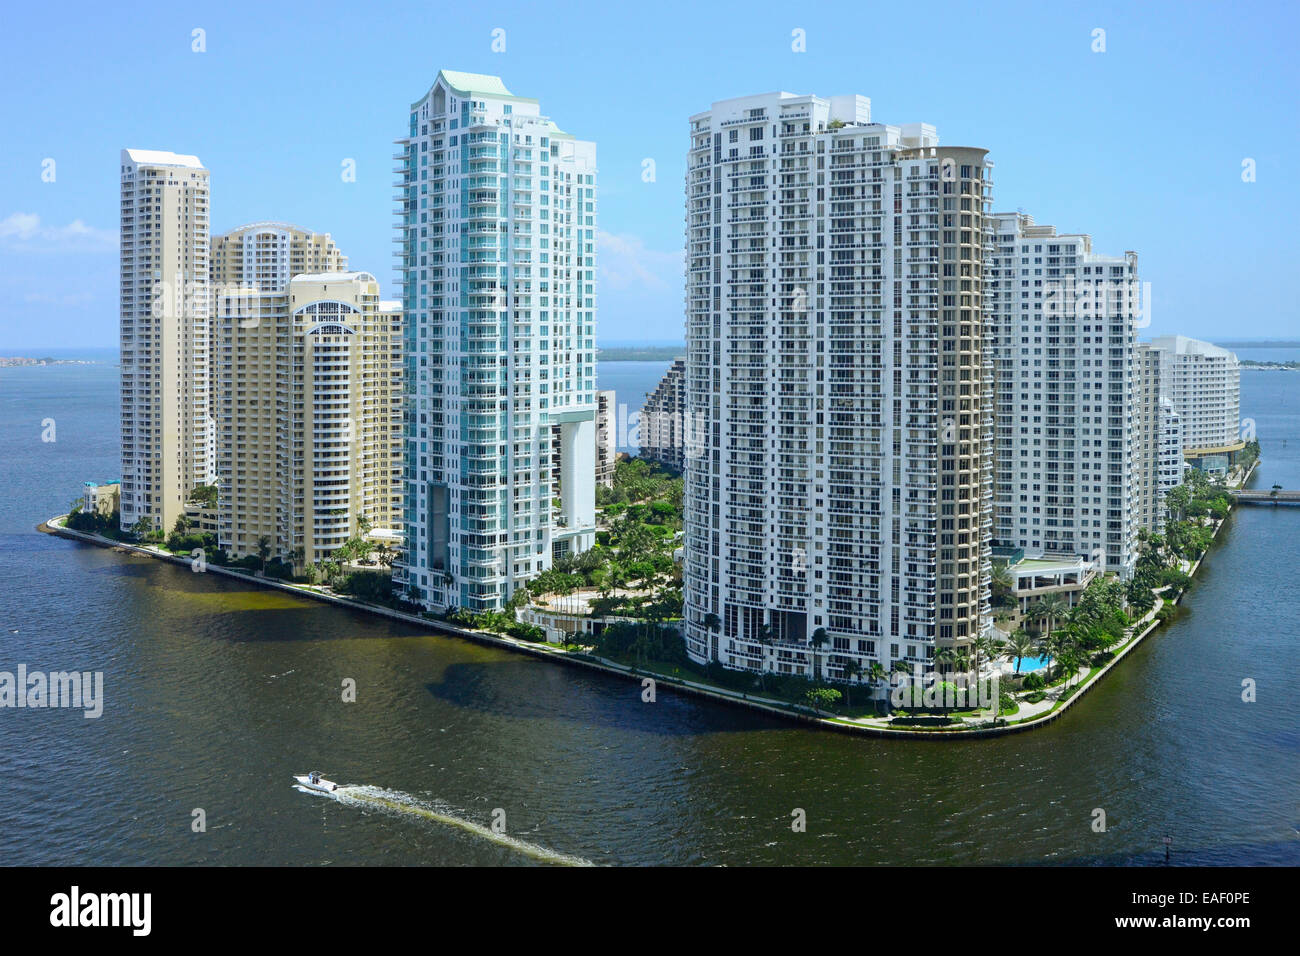 Brickell Key - Maimi, Florida: Day time shot of the Condominiums on Brickell Key, a man-made island in Downtown Miami, Florida. Stock Photo